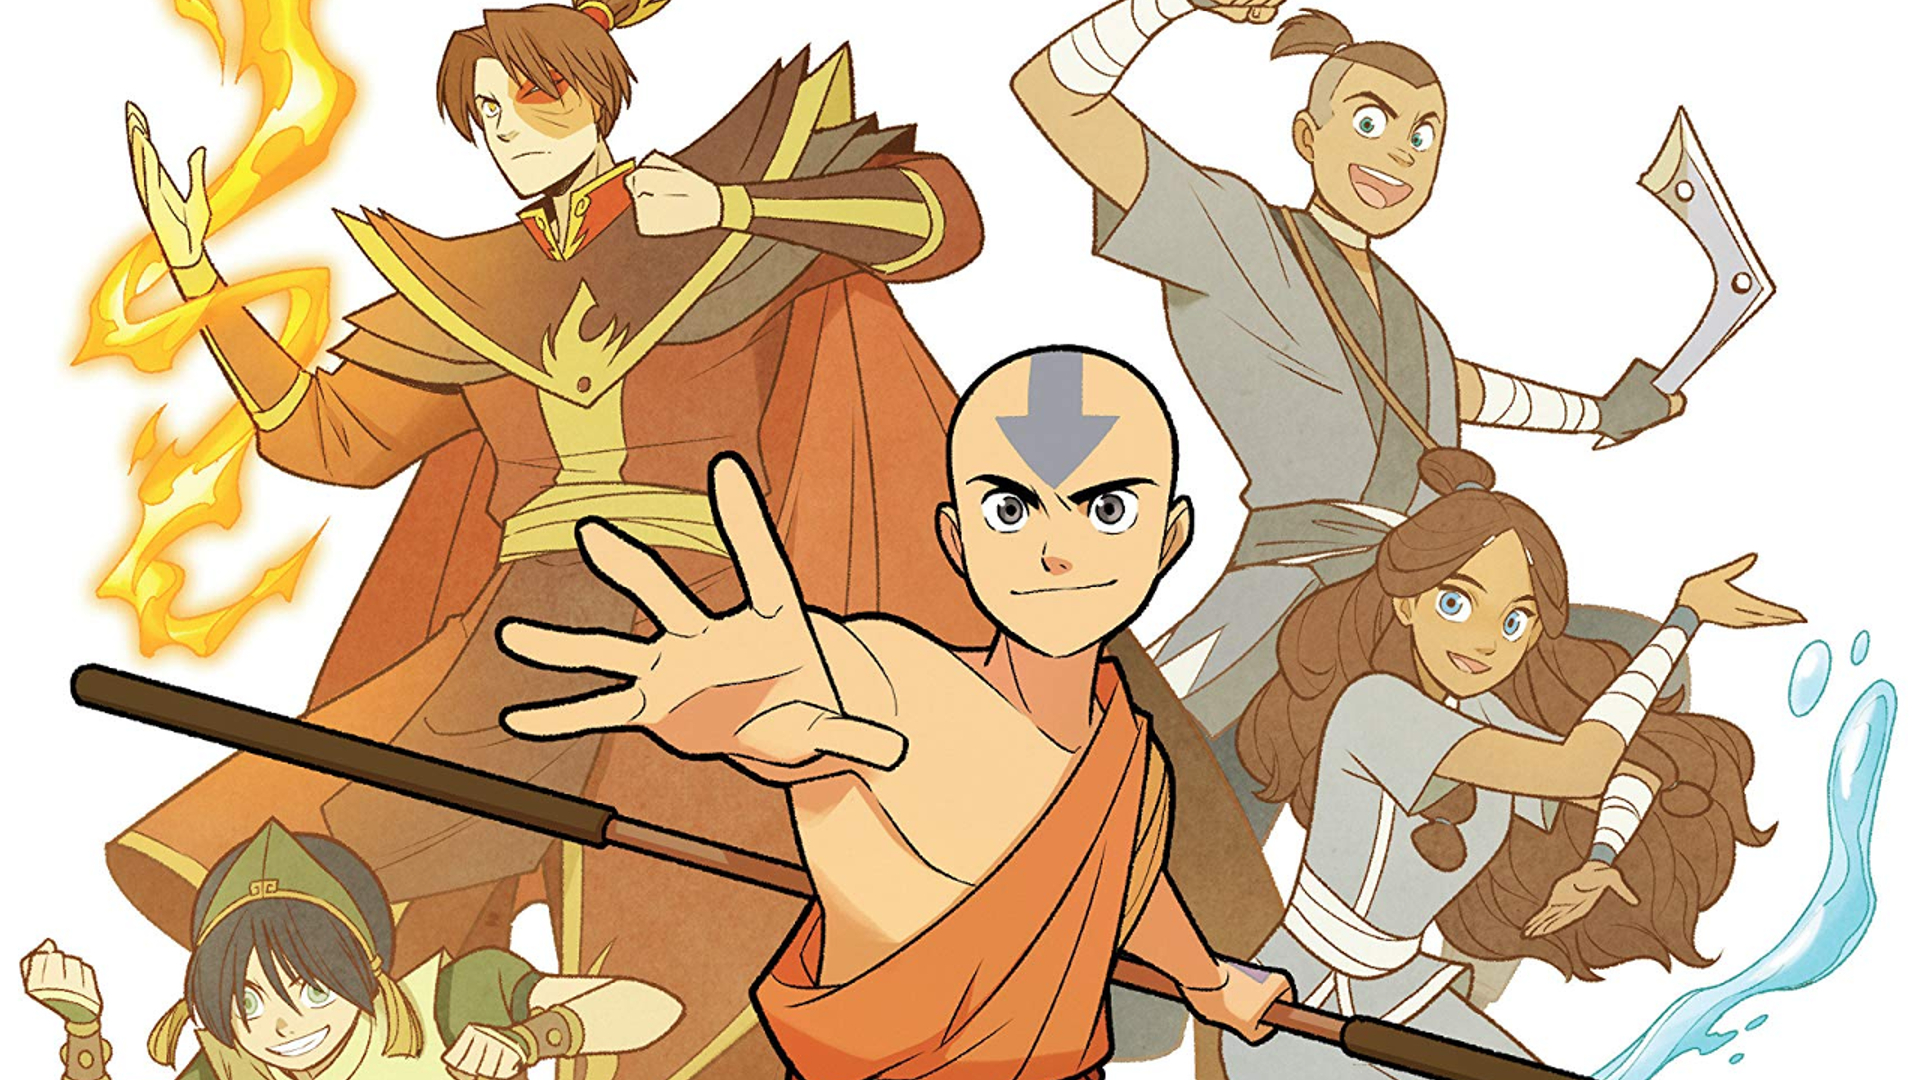 First Avatar The Last Airbender Movie Will Focus On Aang & His Friends